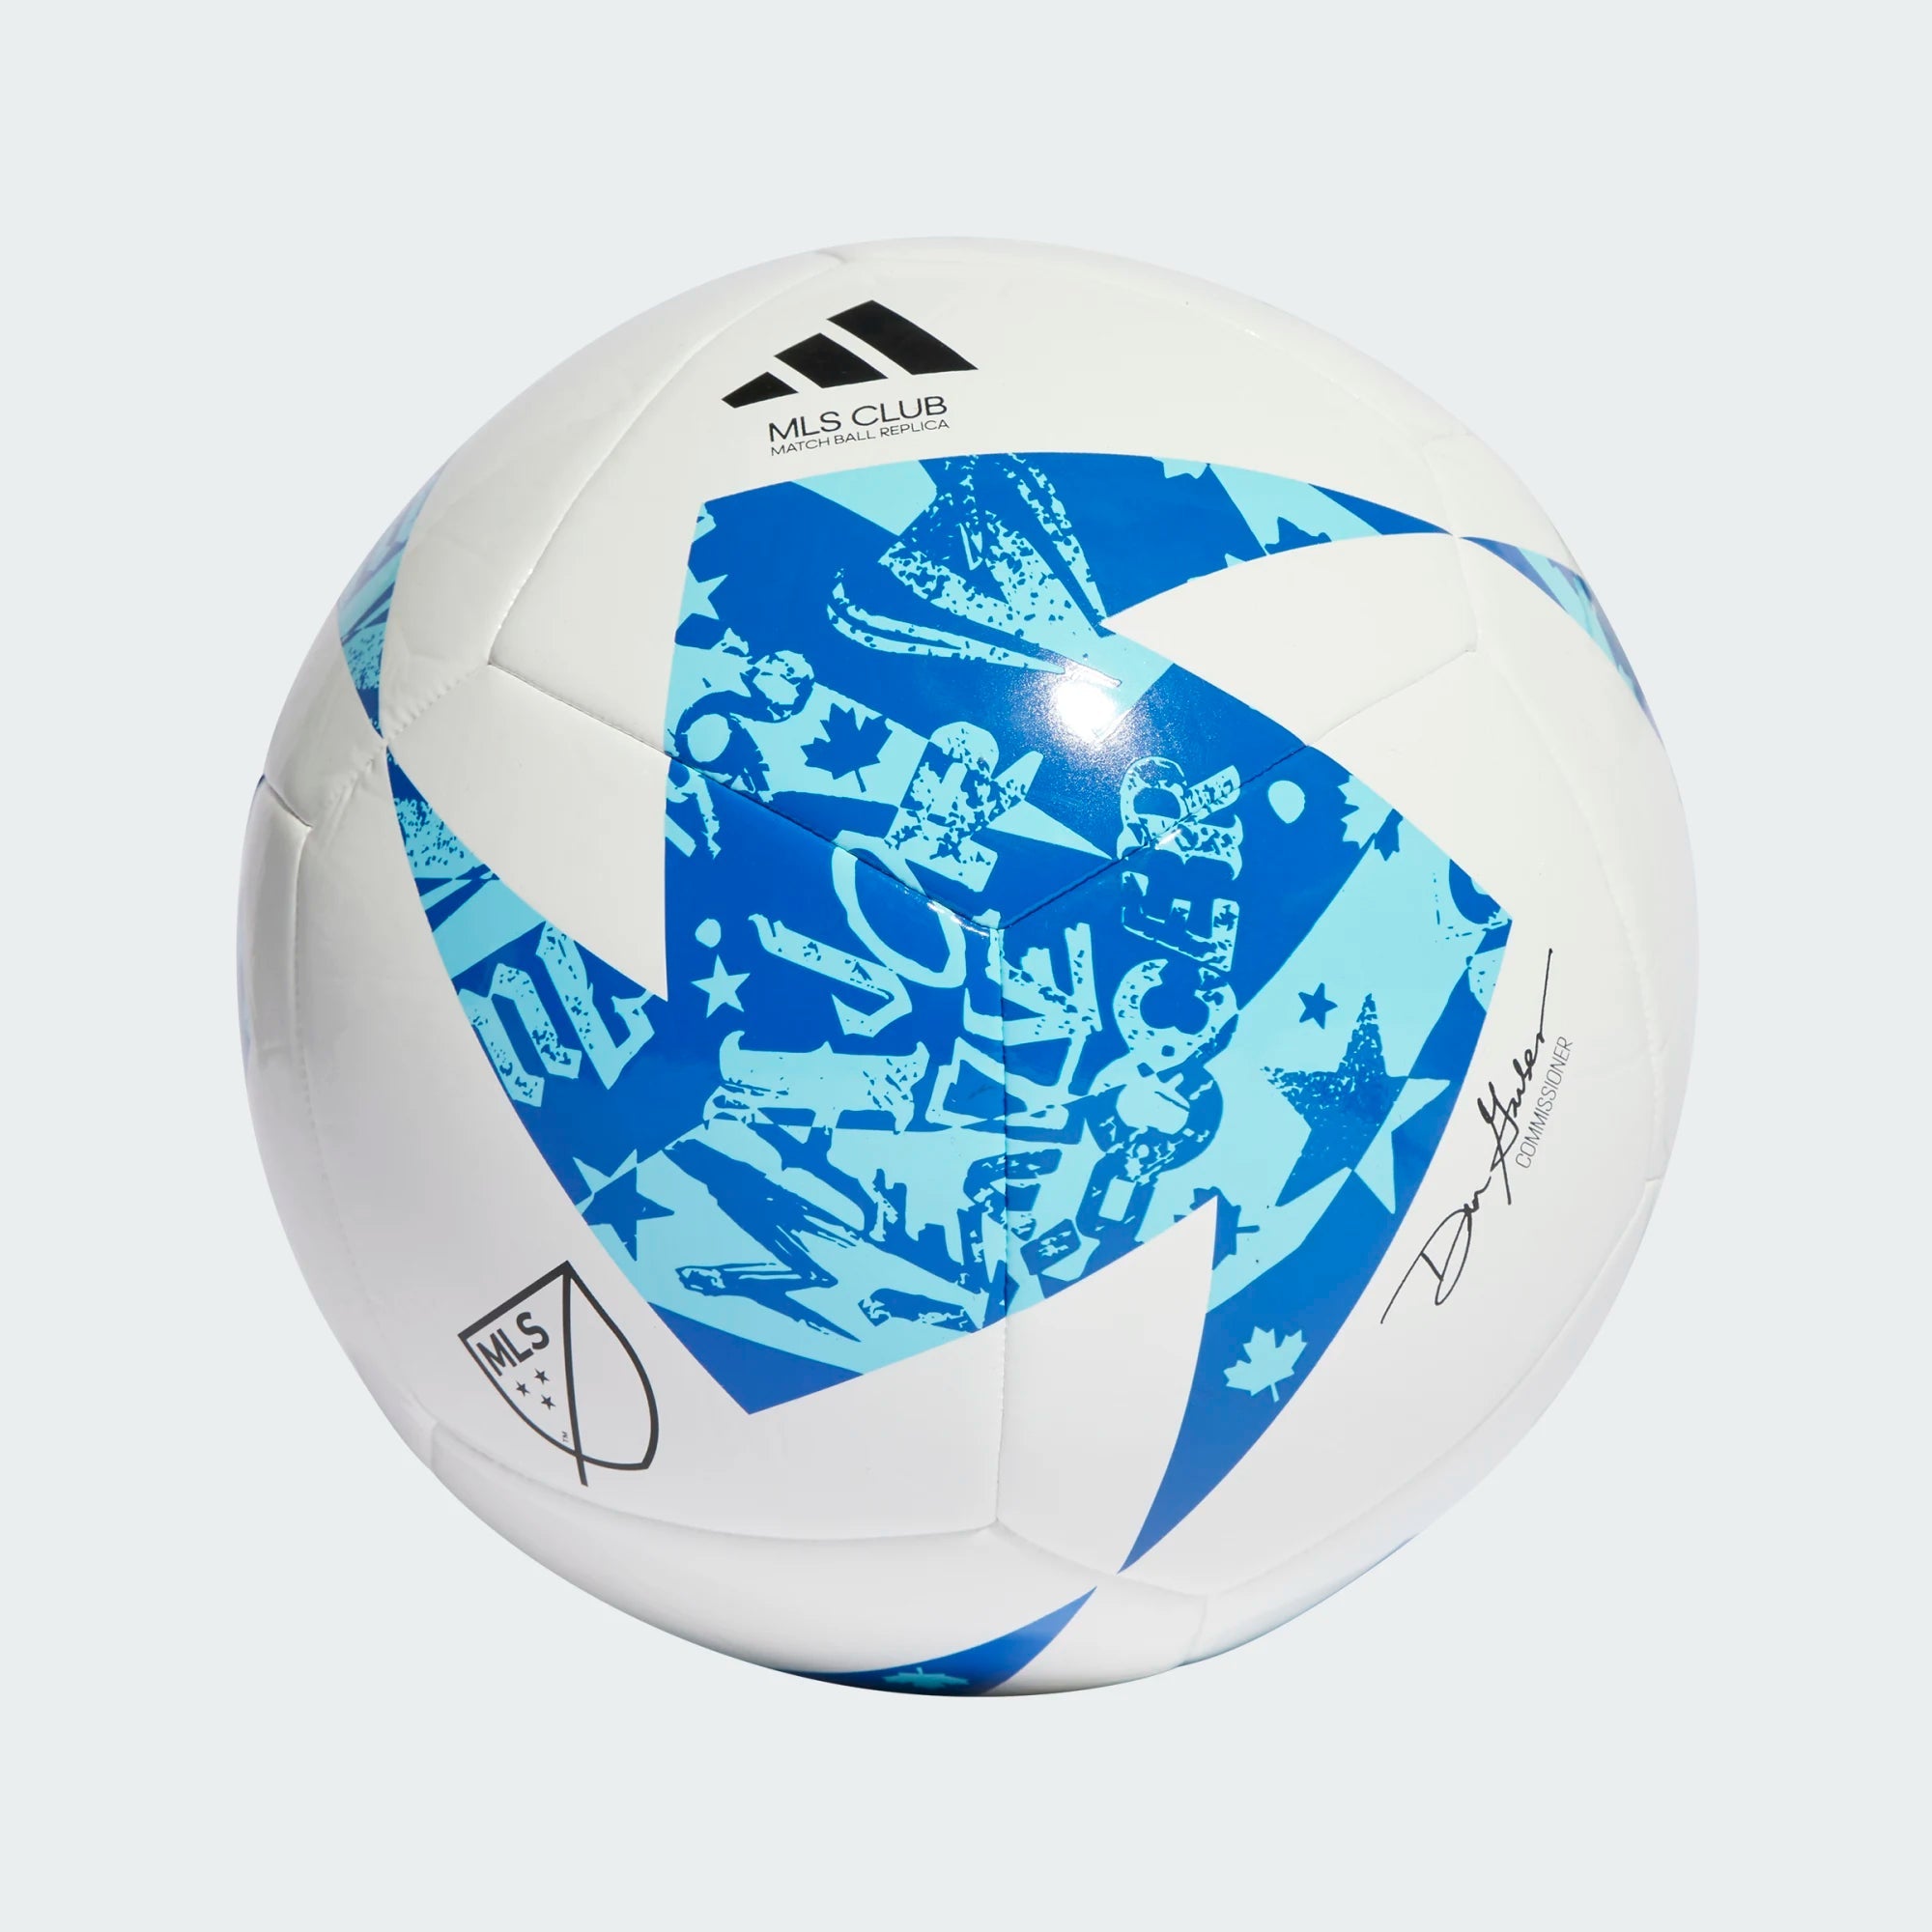 Adidas Mls Club Soccer Ball-Adidas-Sports Replay - Sports Excellence